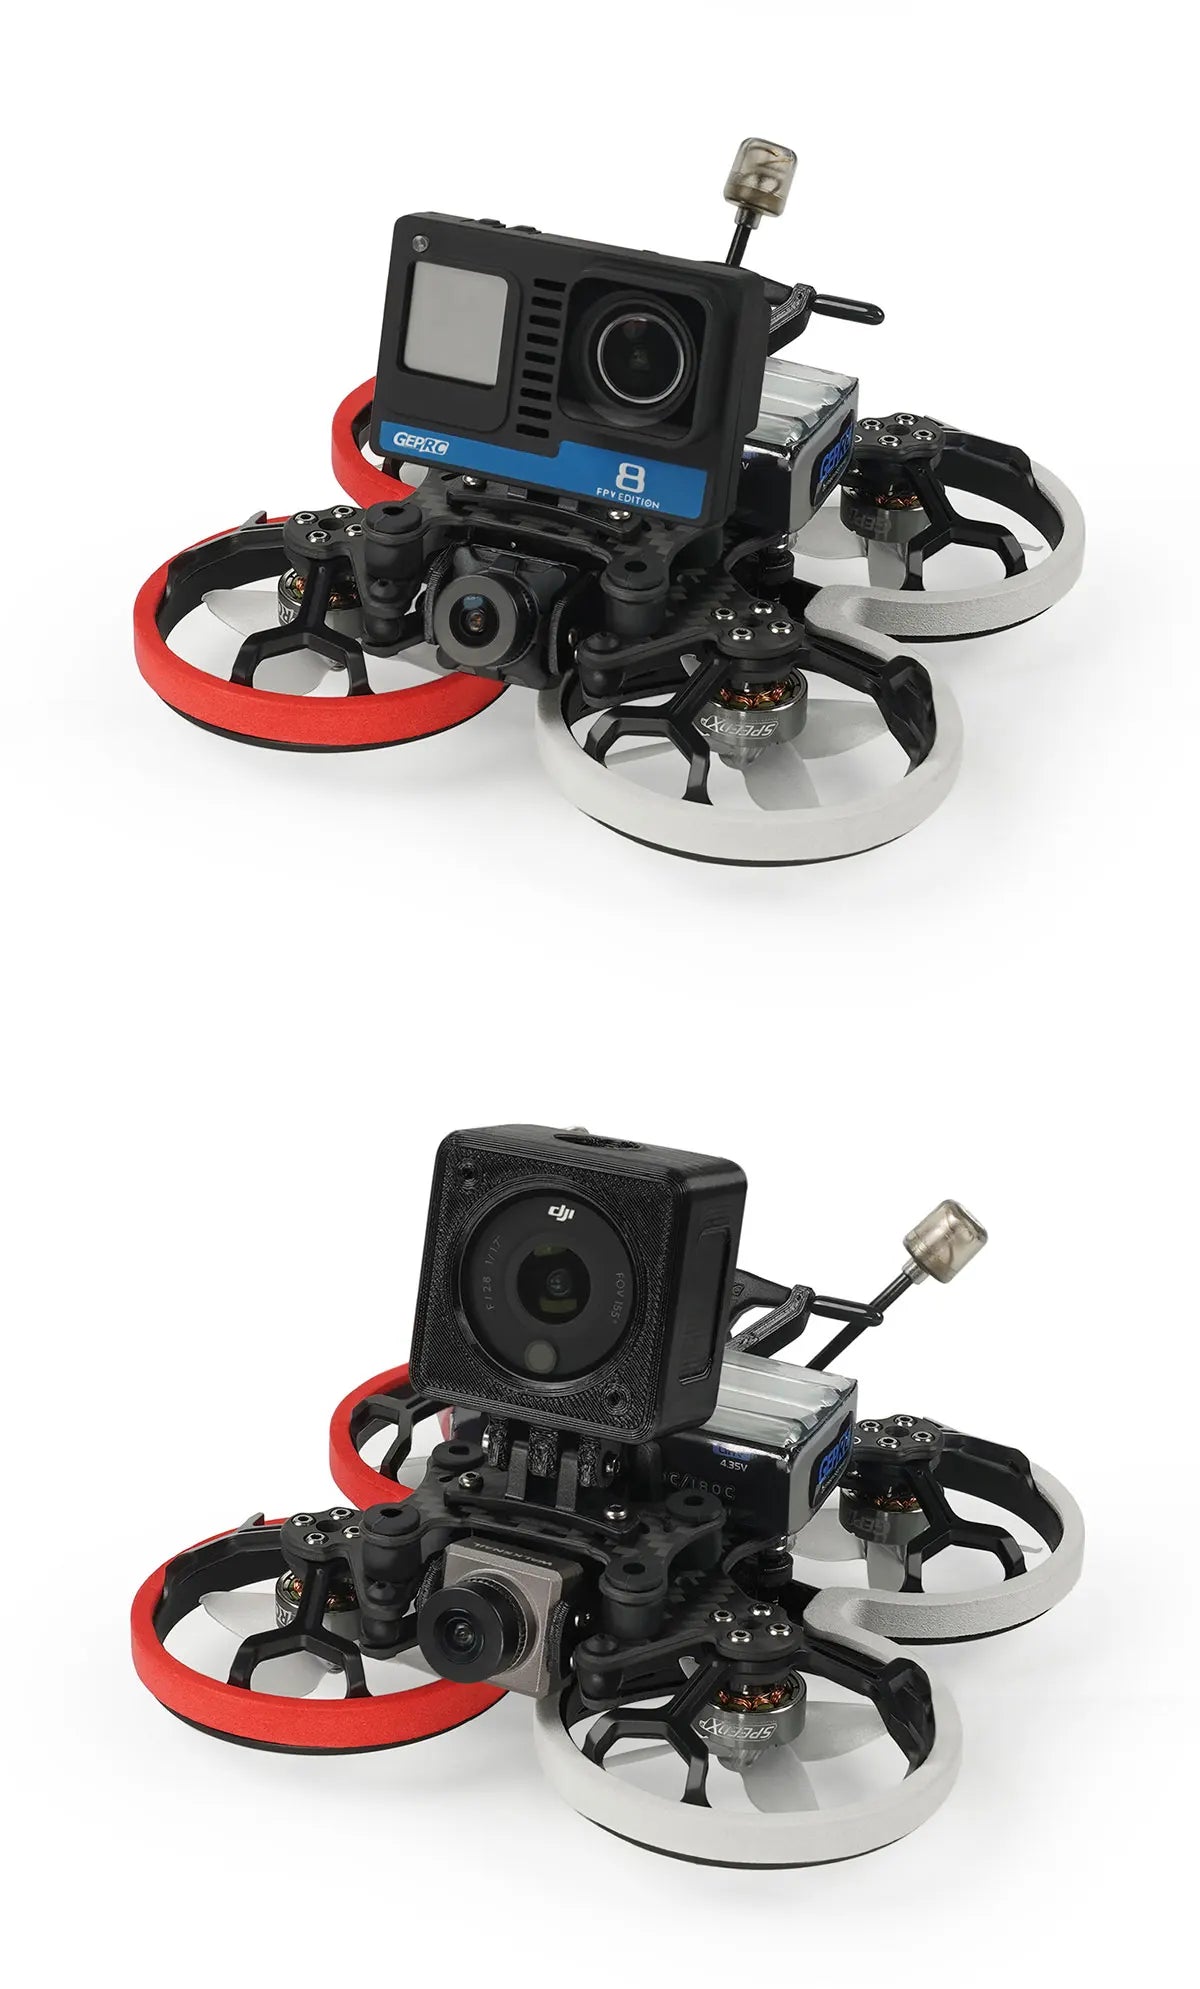 GEPRC Cinelog20 Analog FPV Drone, it is lighter in weight and has a longer battery life